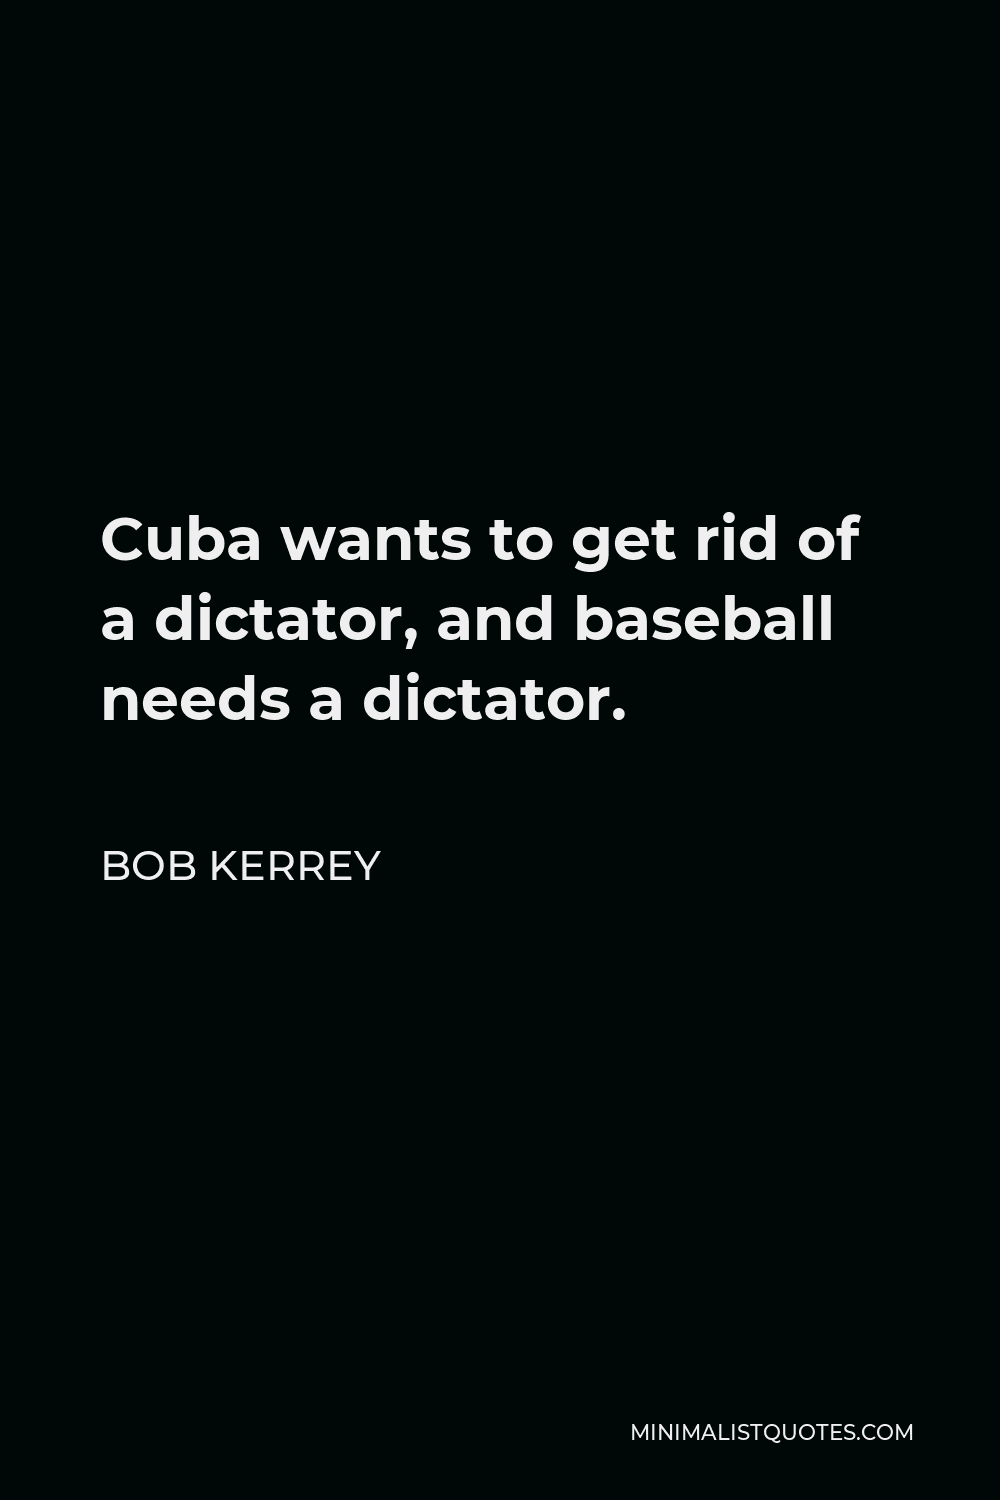 Bob Kerrey Quote - Cuba wants to get rid of a dictator, and baseball needs a dictator.